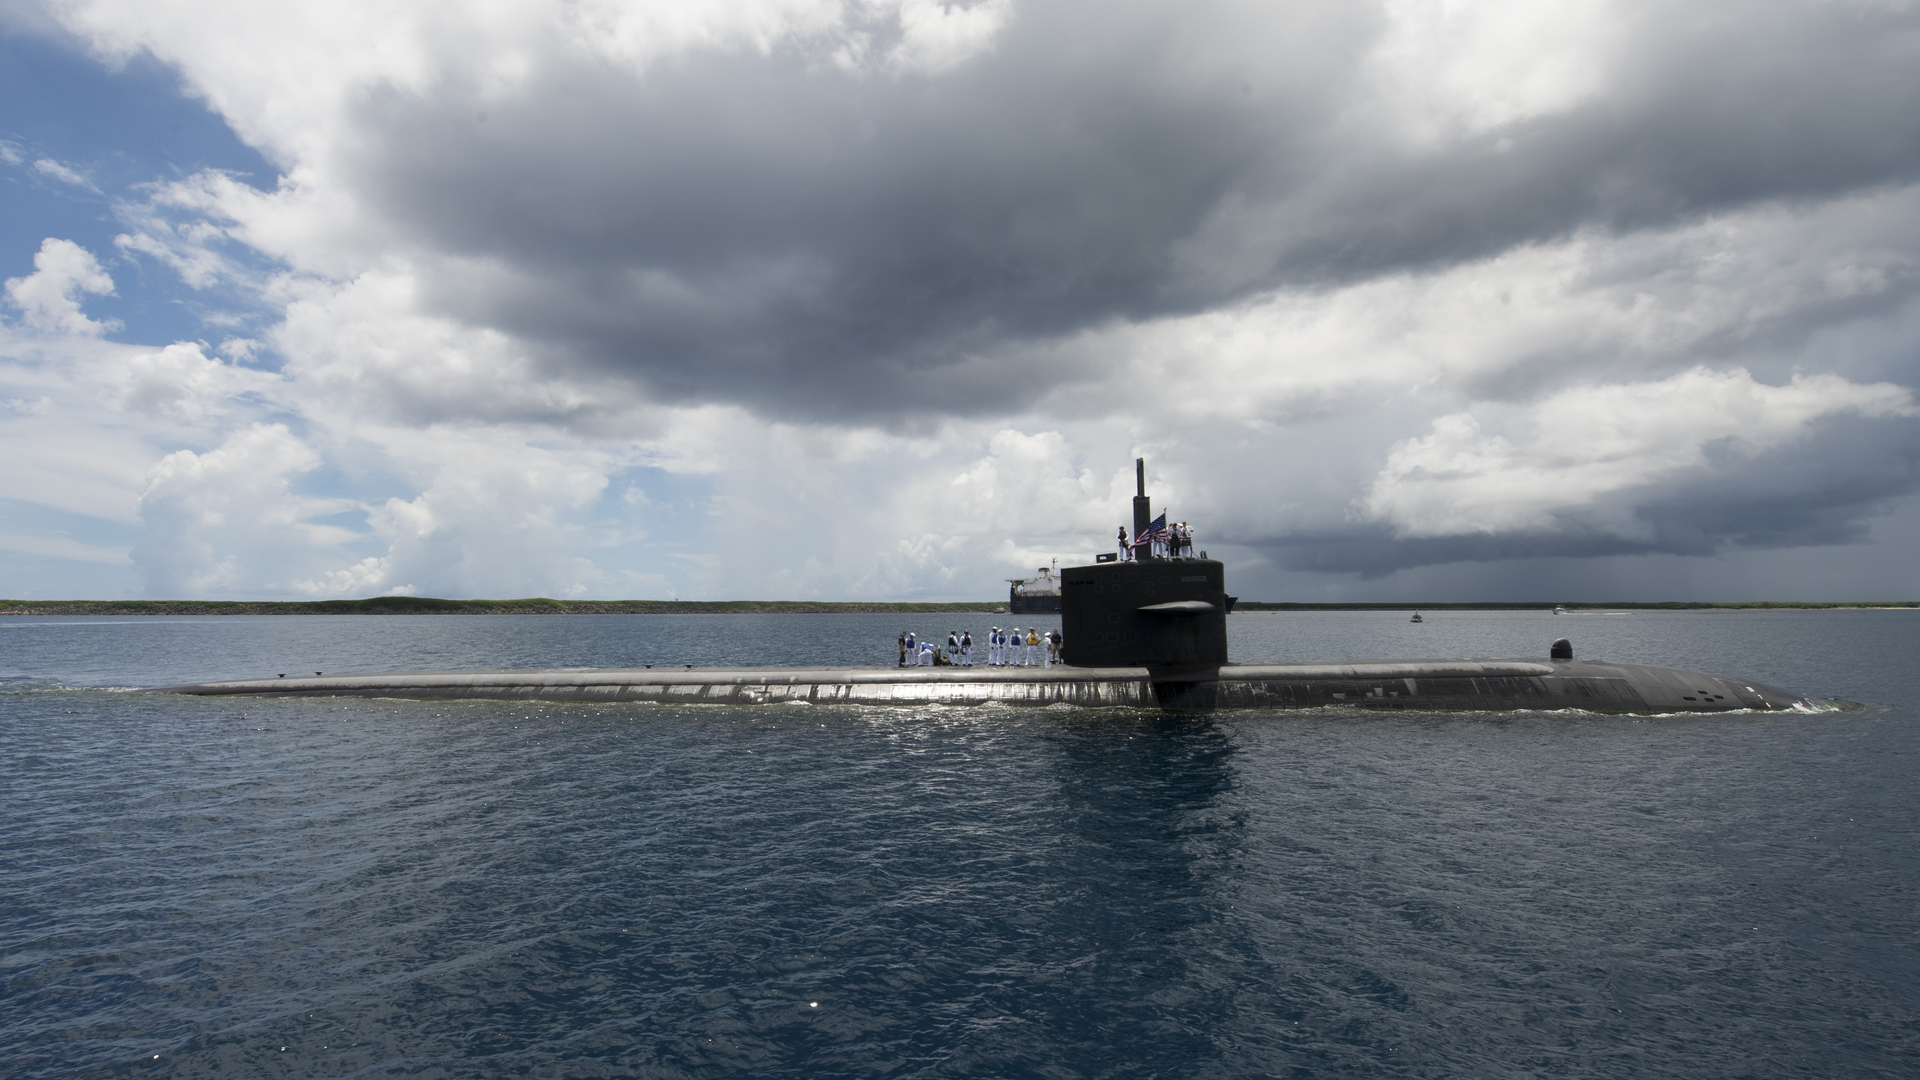 Apra Harbor, Guam: (June 29, 2018) The Los Angeles-class fast-attack submarine USS Oklahoma City (SSN 723) returns to its homeport of Apra Harbor, Guam. Oklahoma City is one of four forward-deployed submarines assigned to Submarine Squadron 15 -- U.S. Navy photo by Culinary Specialist Seaman Jonathan Perez. -